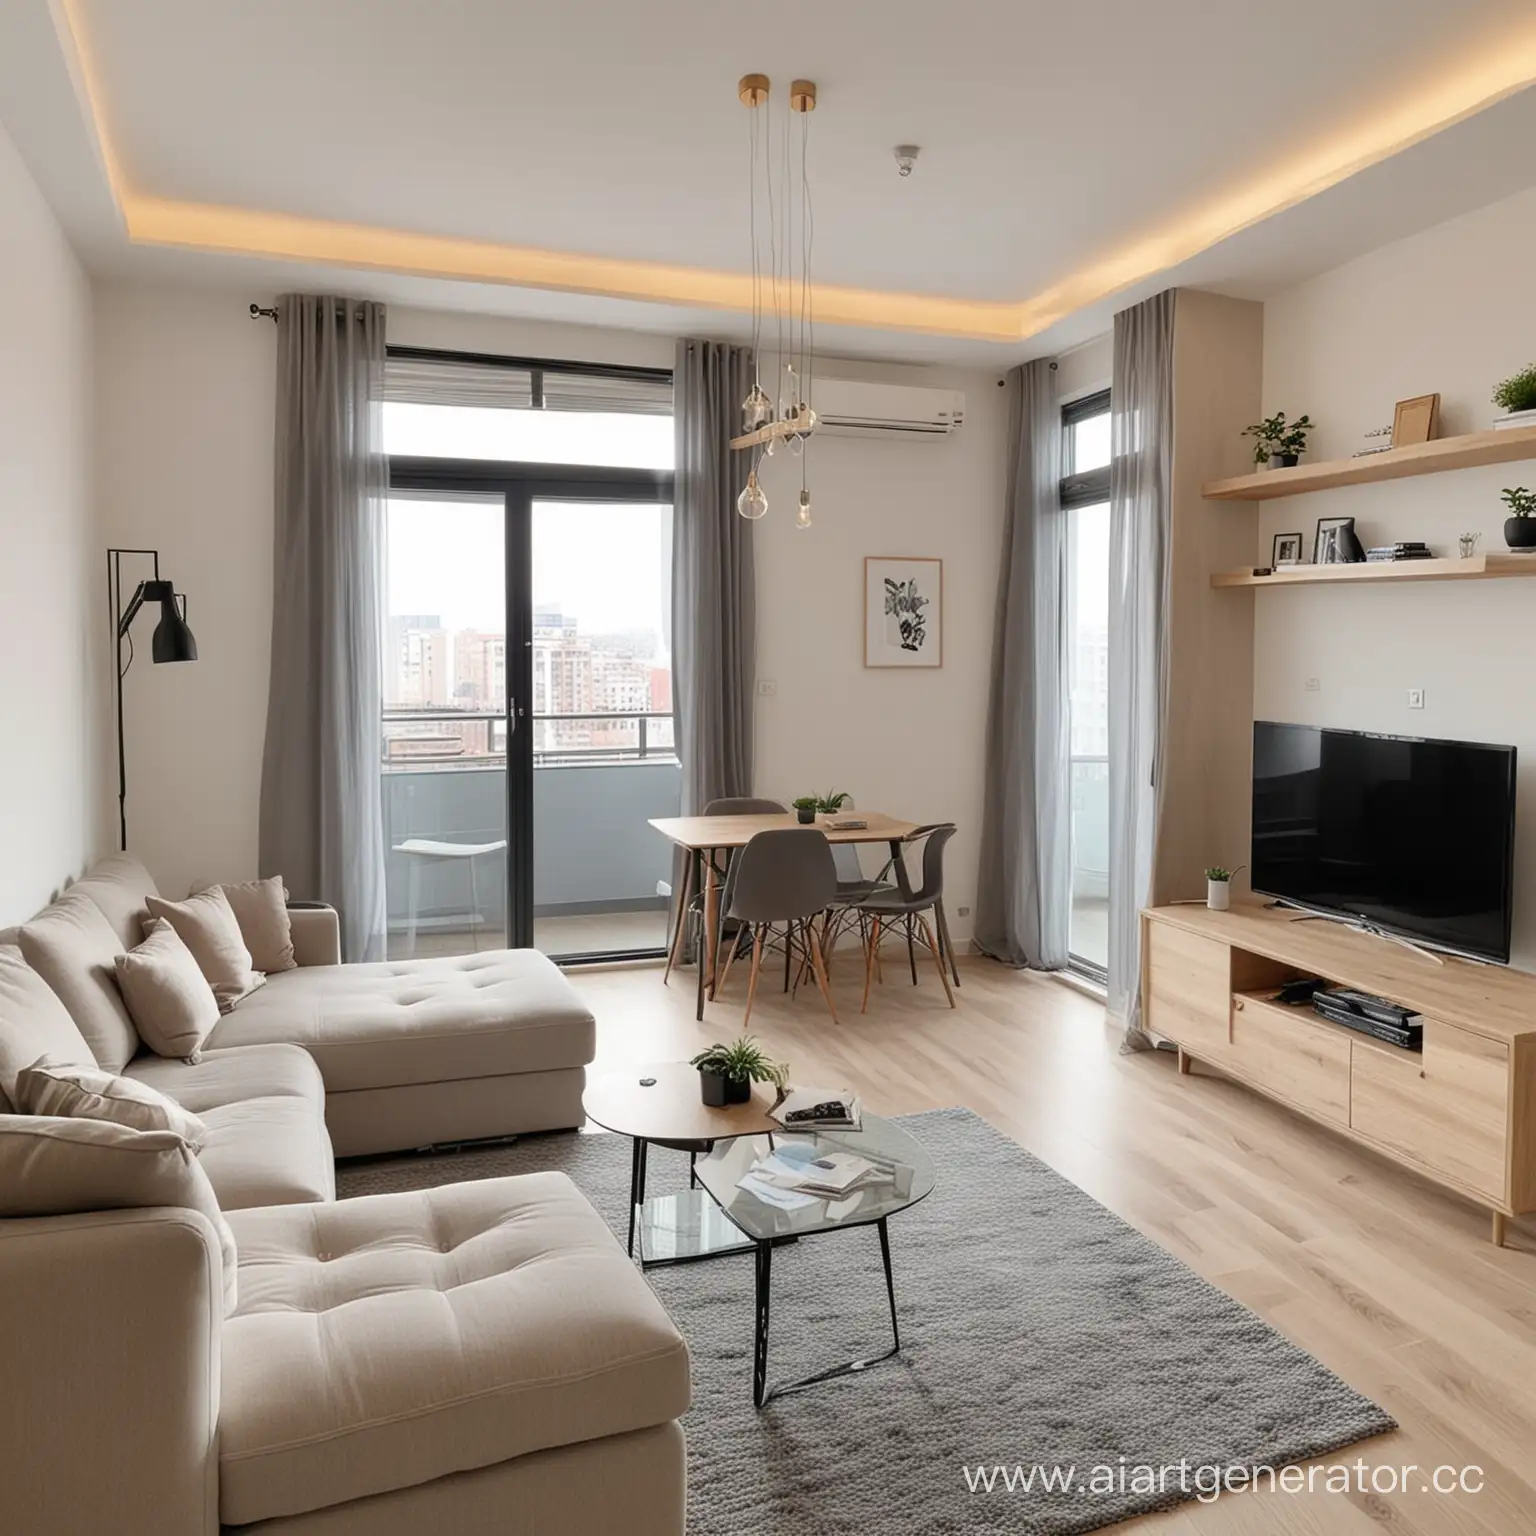 Cozy-Modern-Apartment-Interior-with-Bright-Dcor-and-New-Furniture